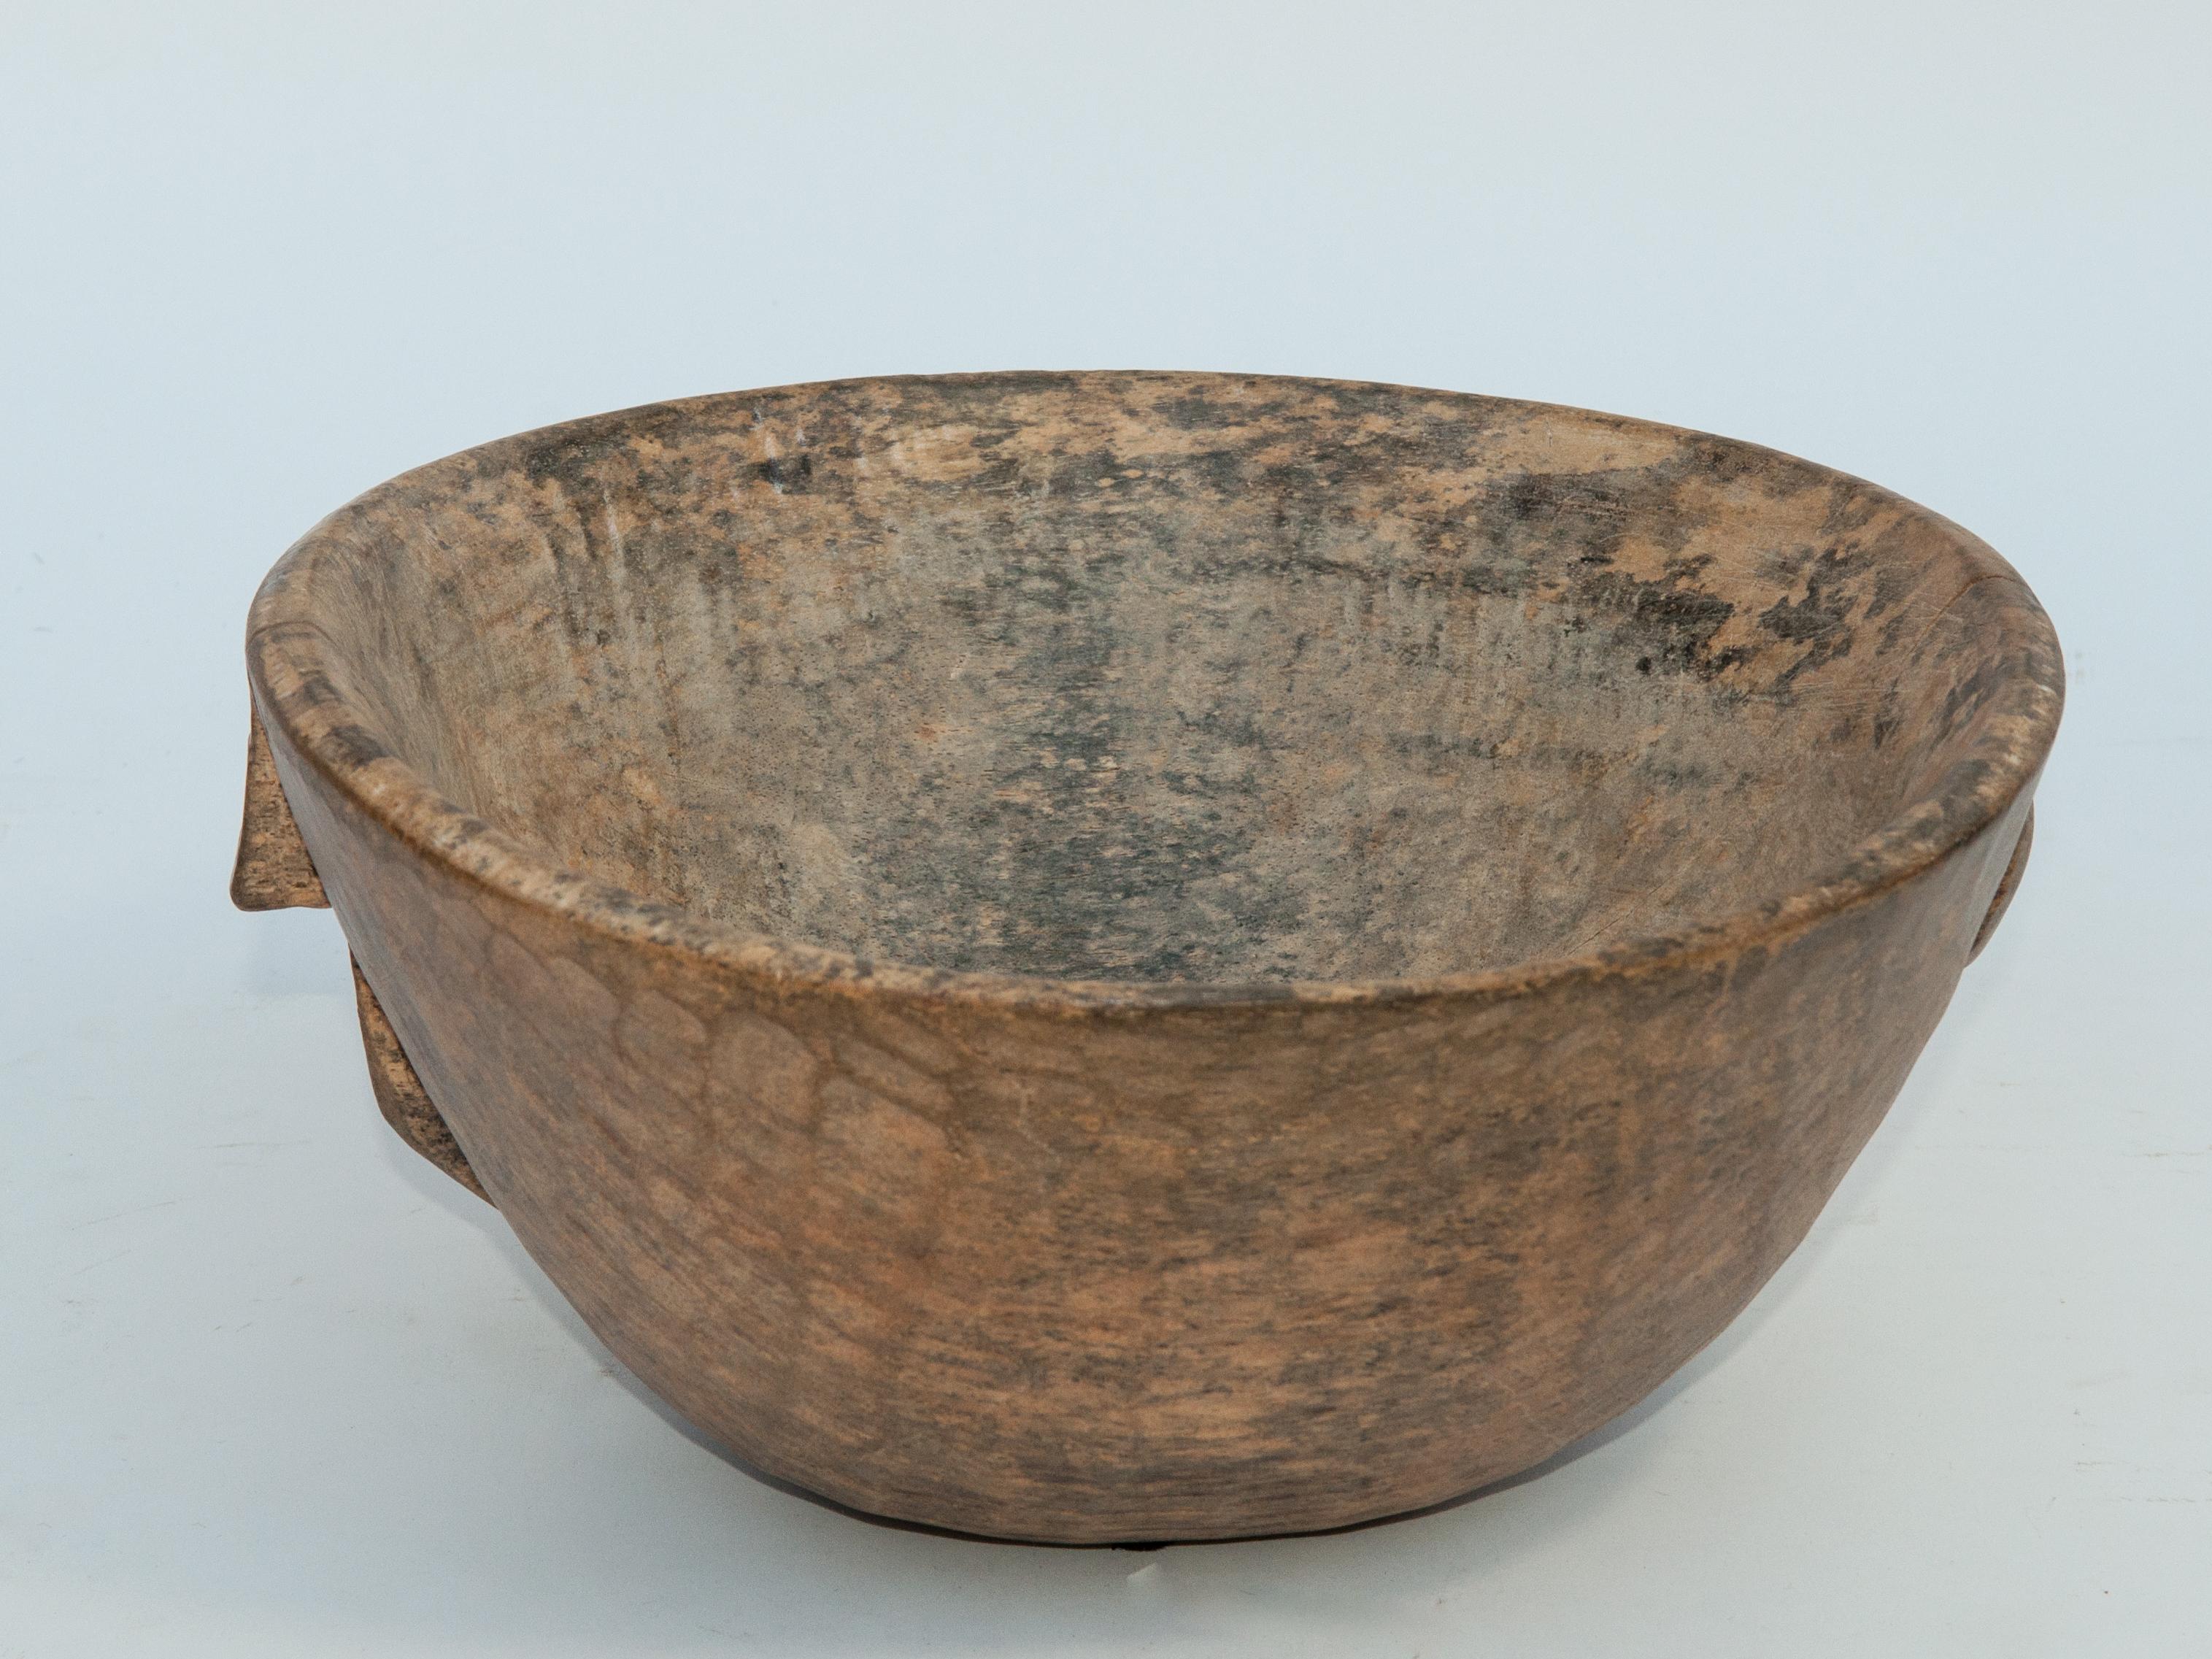 Nigerien Tribal Light Colored, Spalted Wooden Bowl, Fulani of Niger, Mid-20th Century